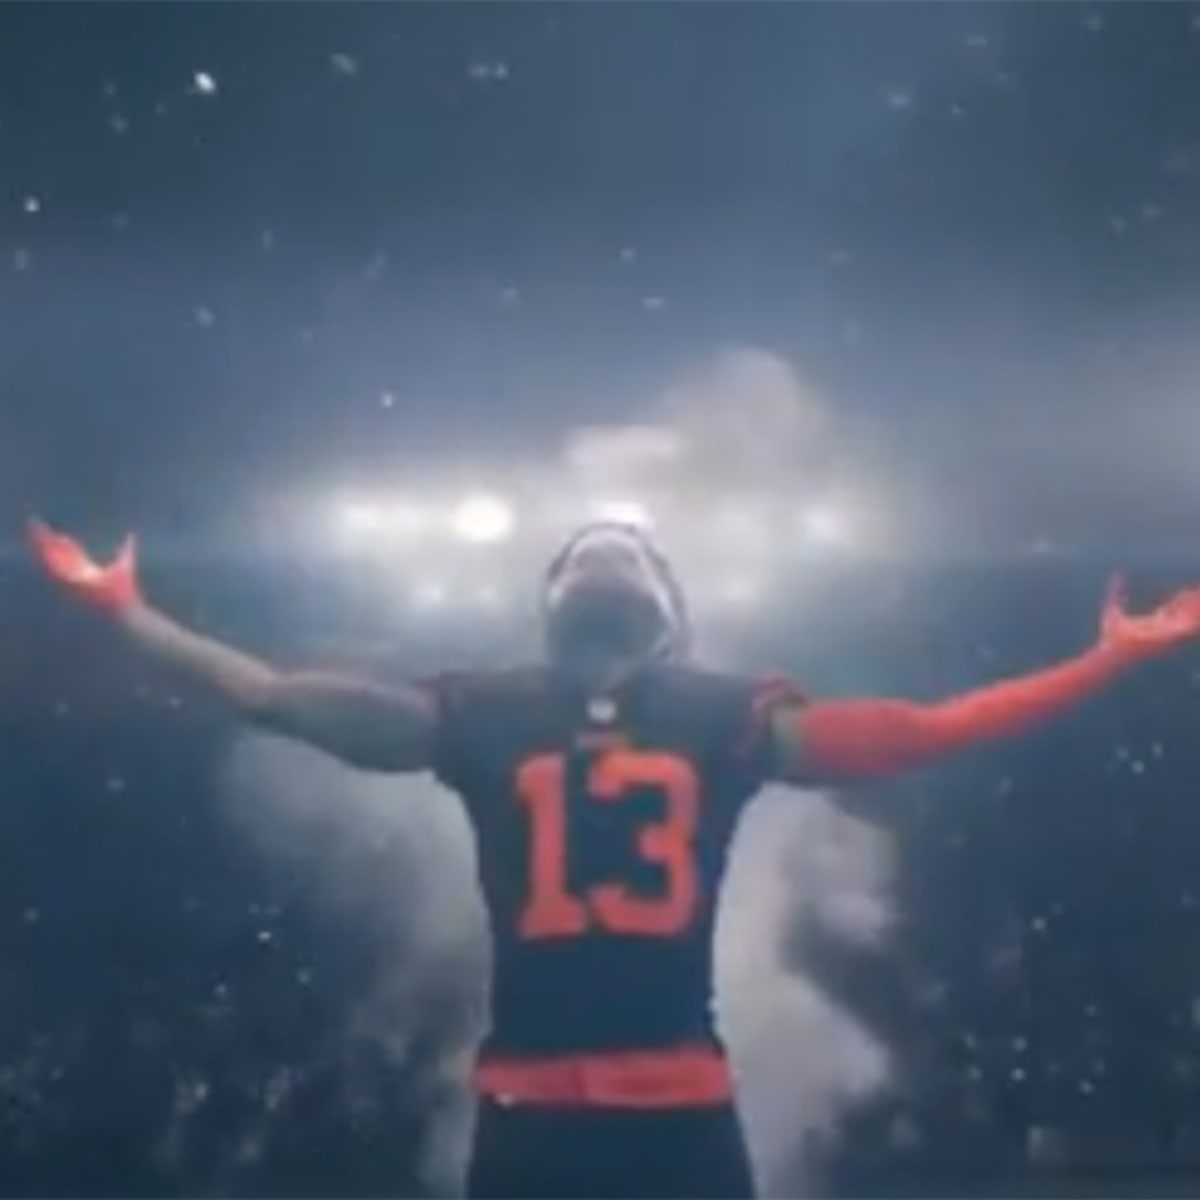 Odell Beckham Jr, and Khalil Mack star in ad (video) - Sports Illustrated